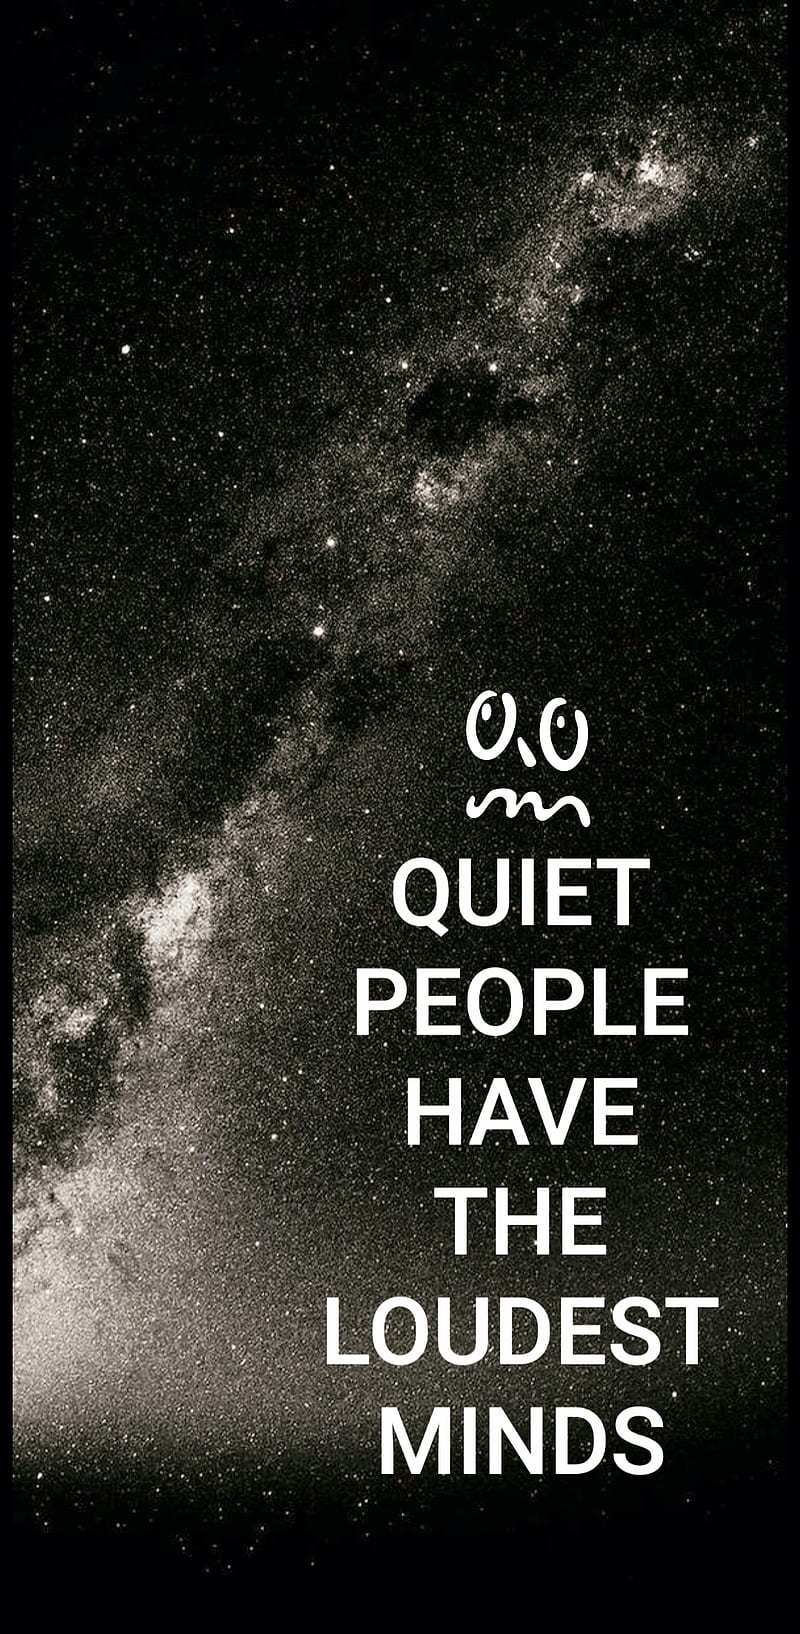 Why do people hate quiet people